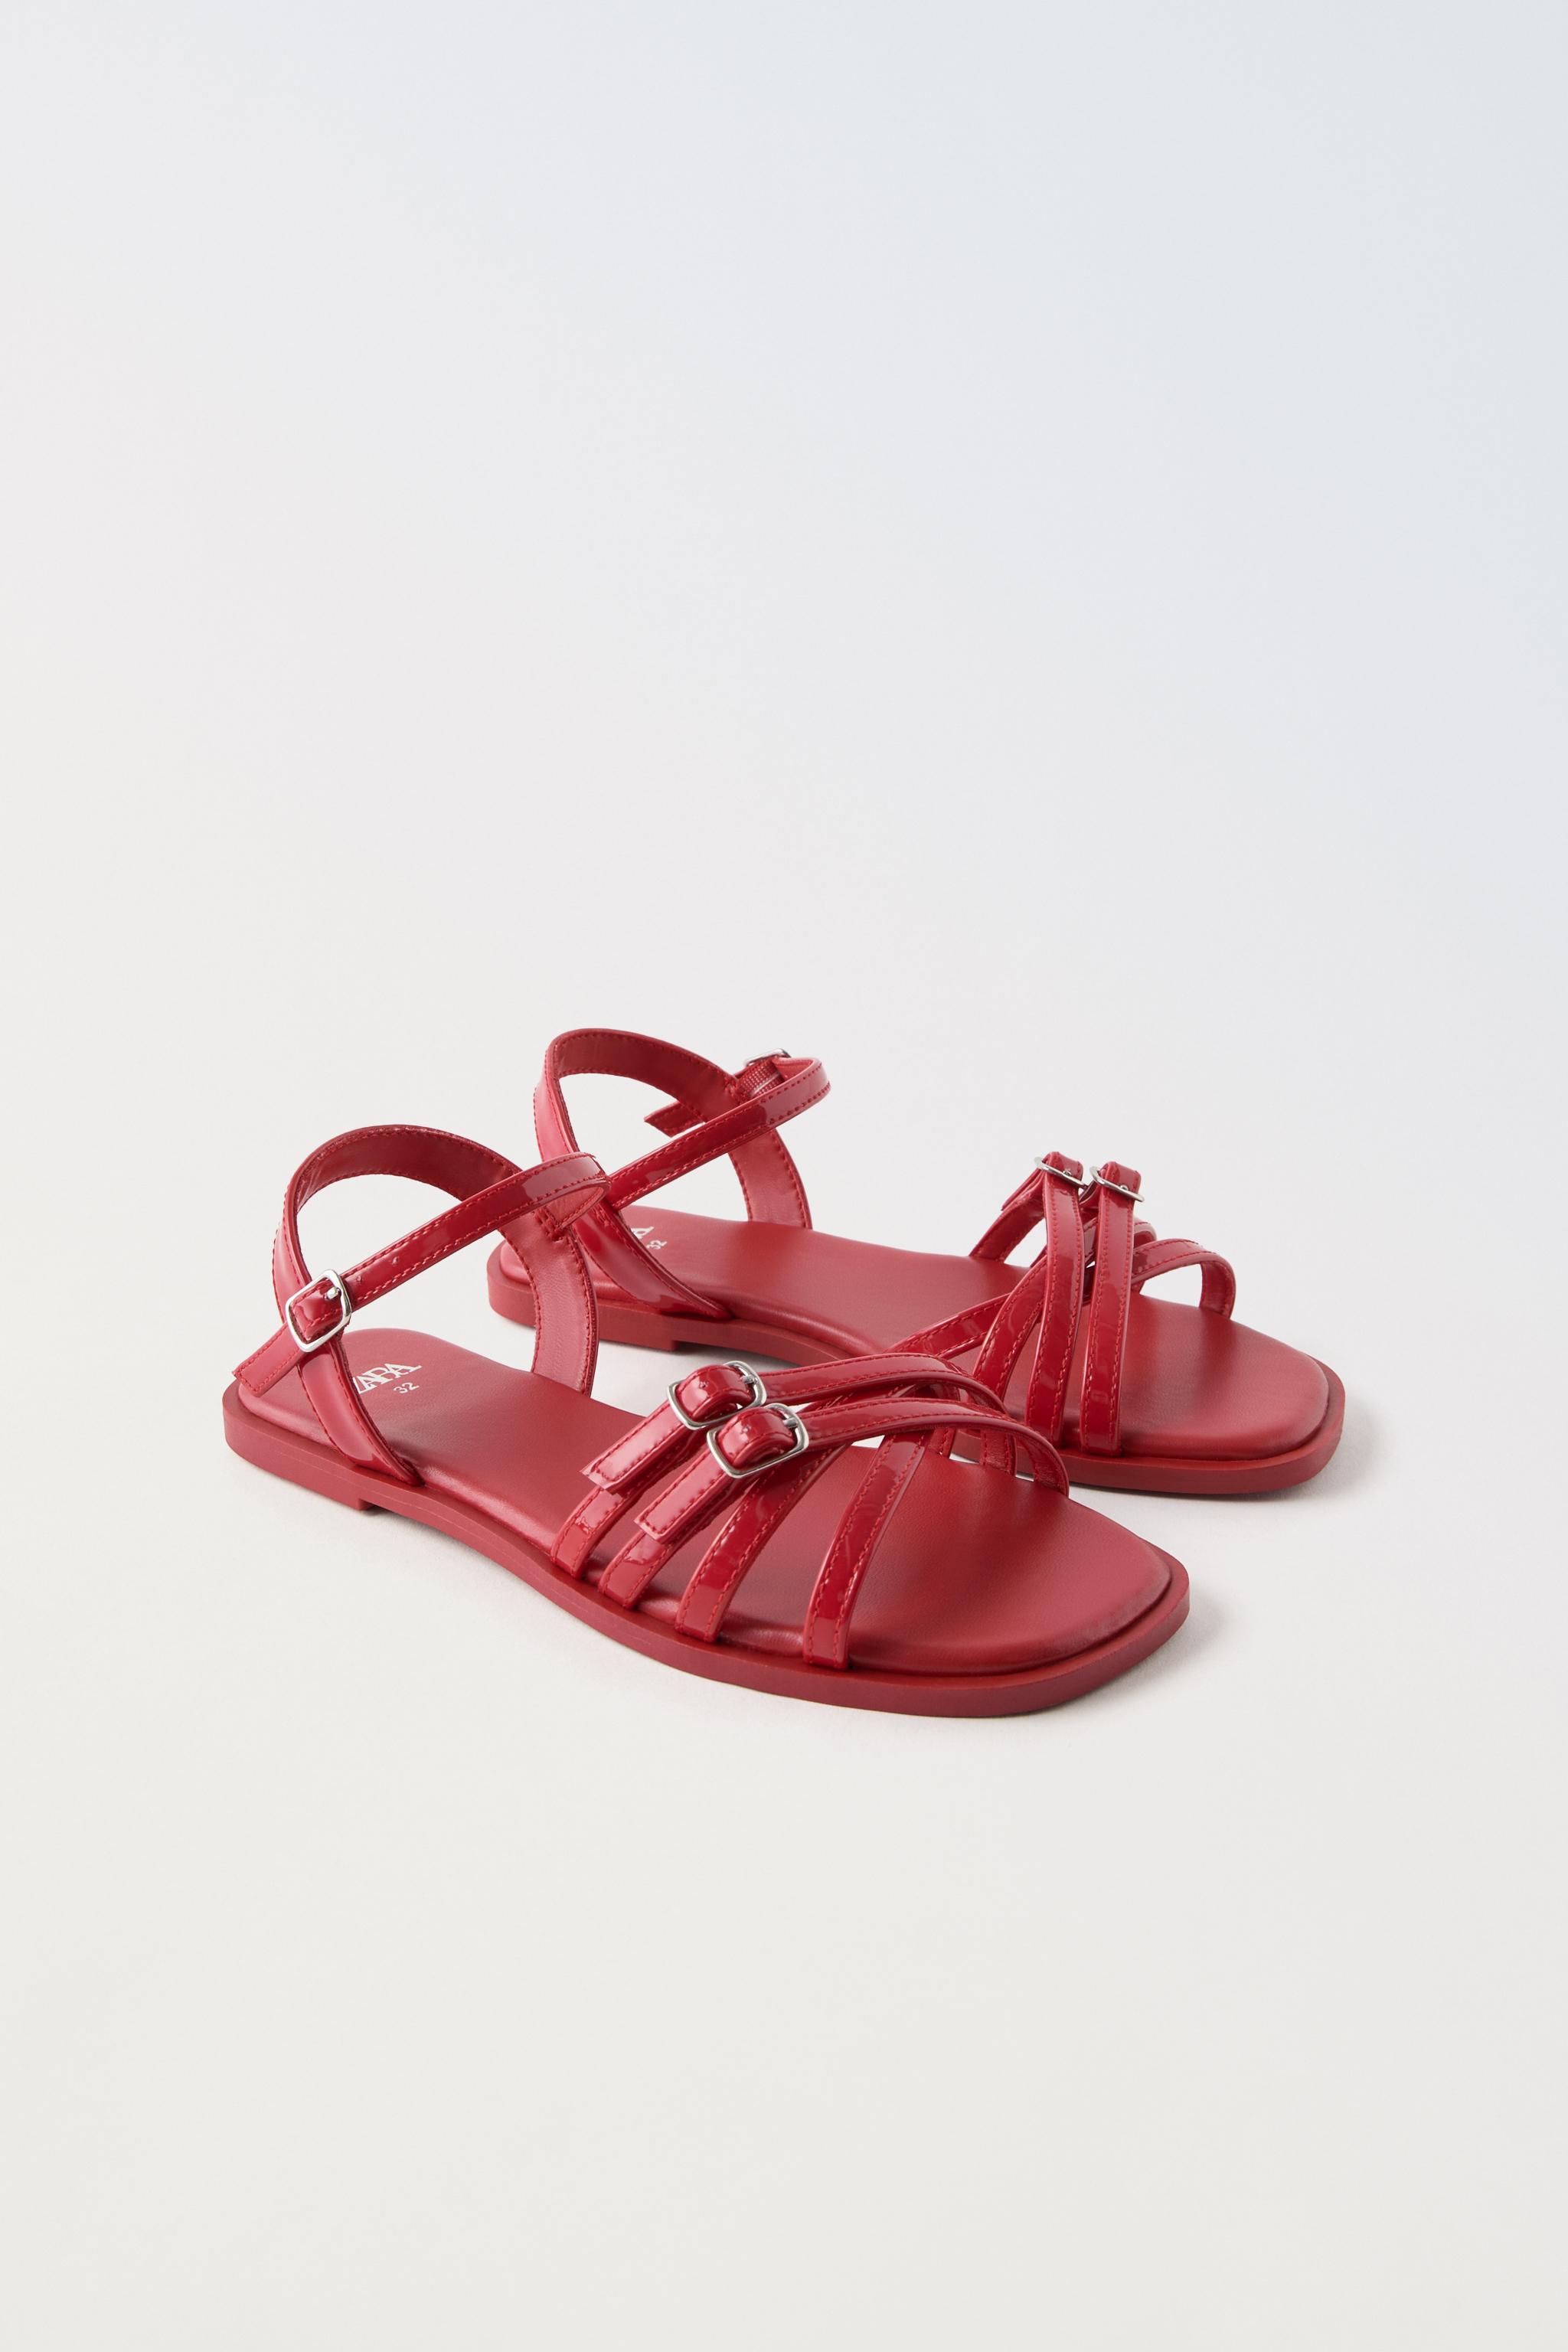 PATENT LEATHER FINISH STRAPPY SANDALS - Red | ZARA United States